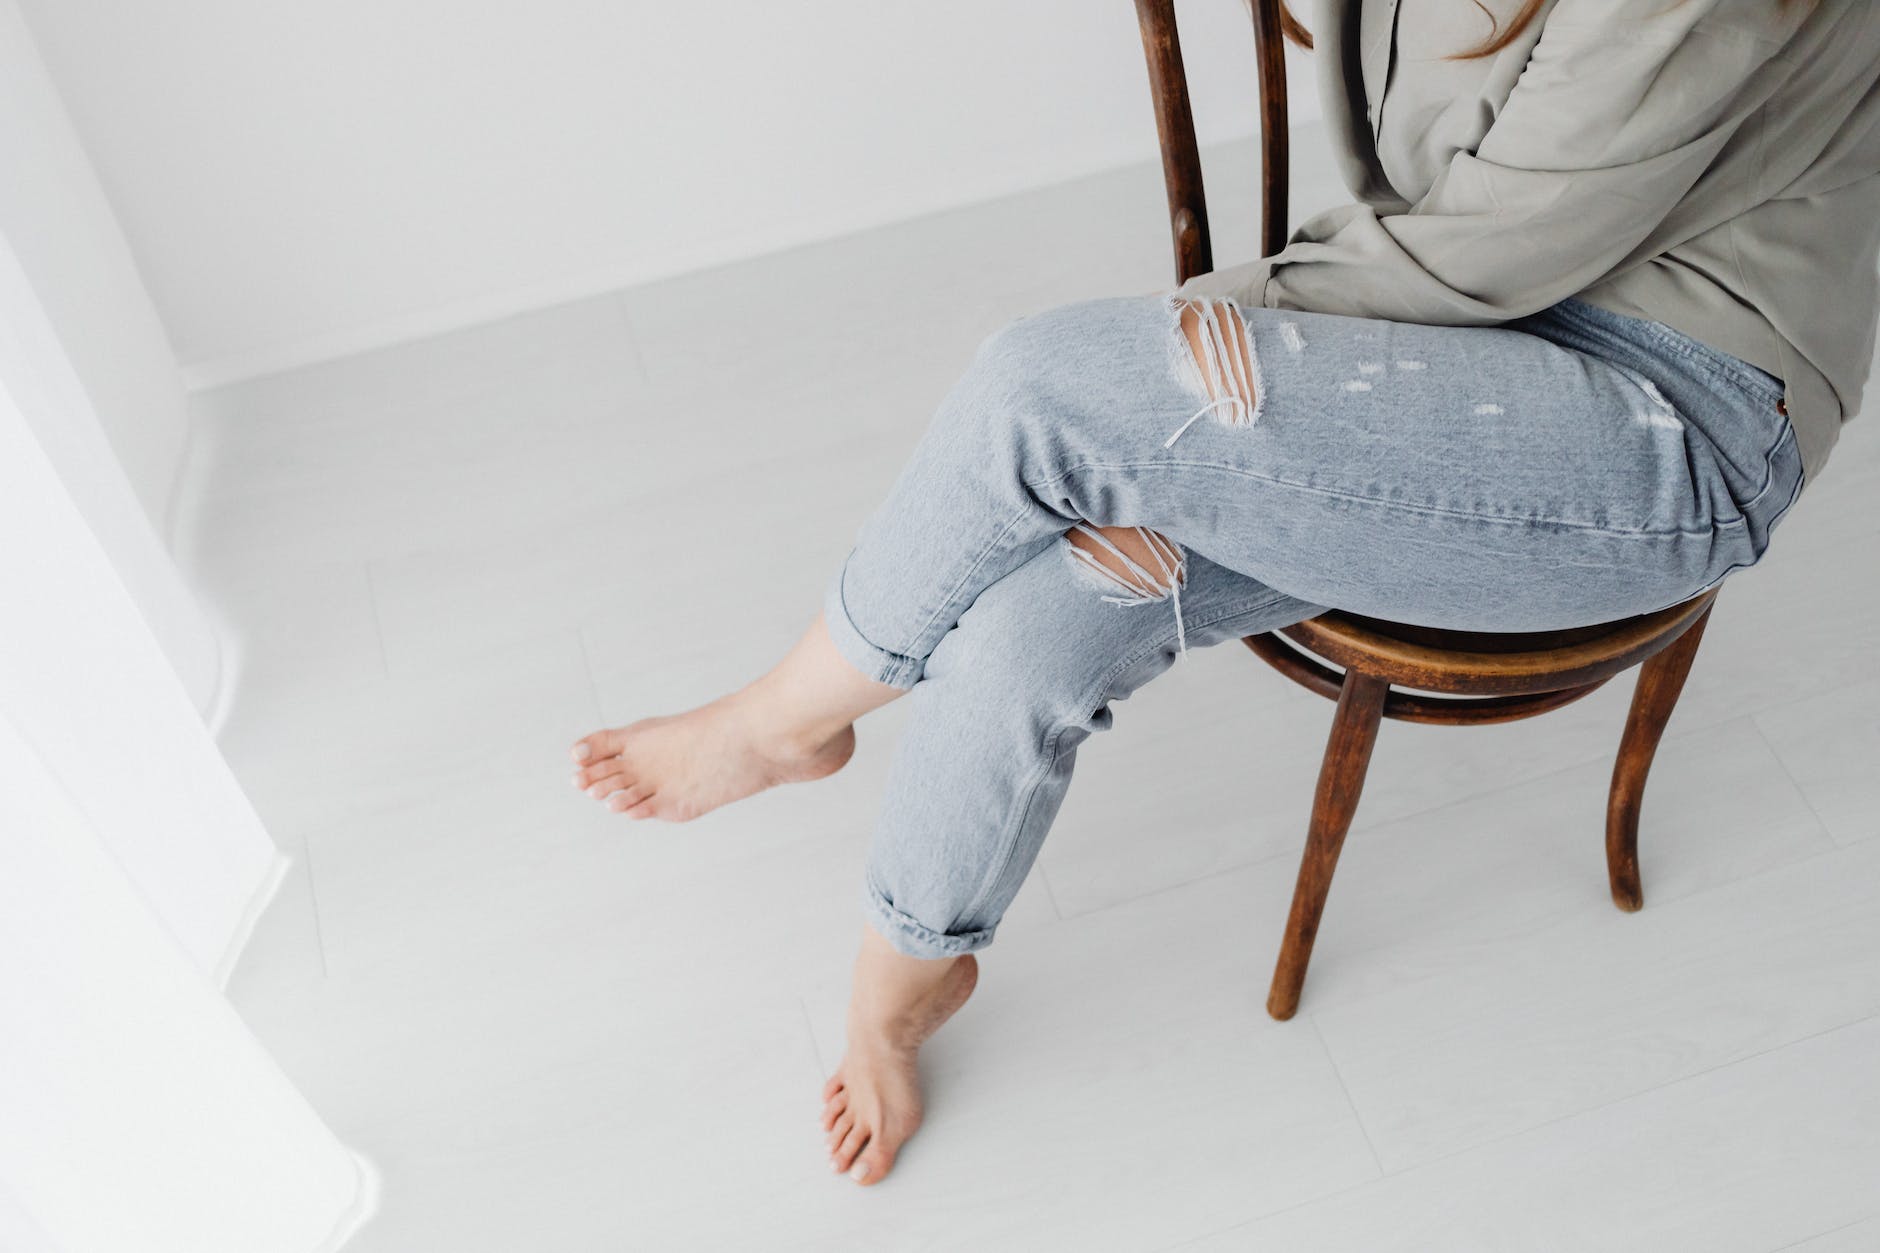 person wearing ripped jeans sitting on a wooden chair